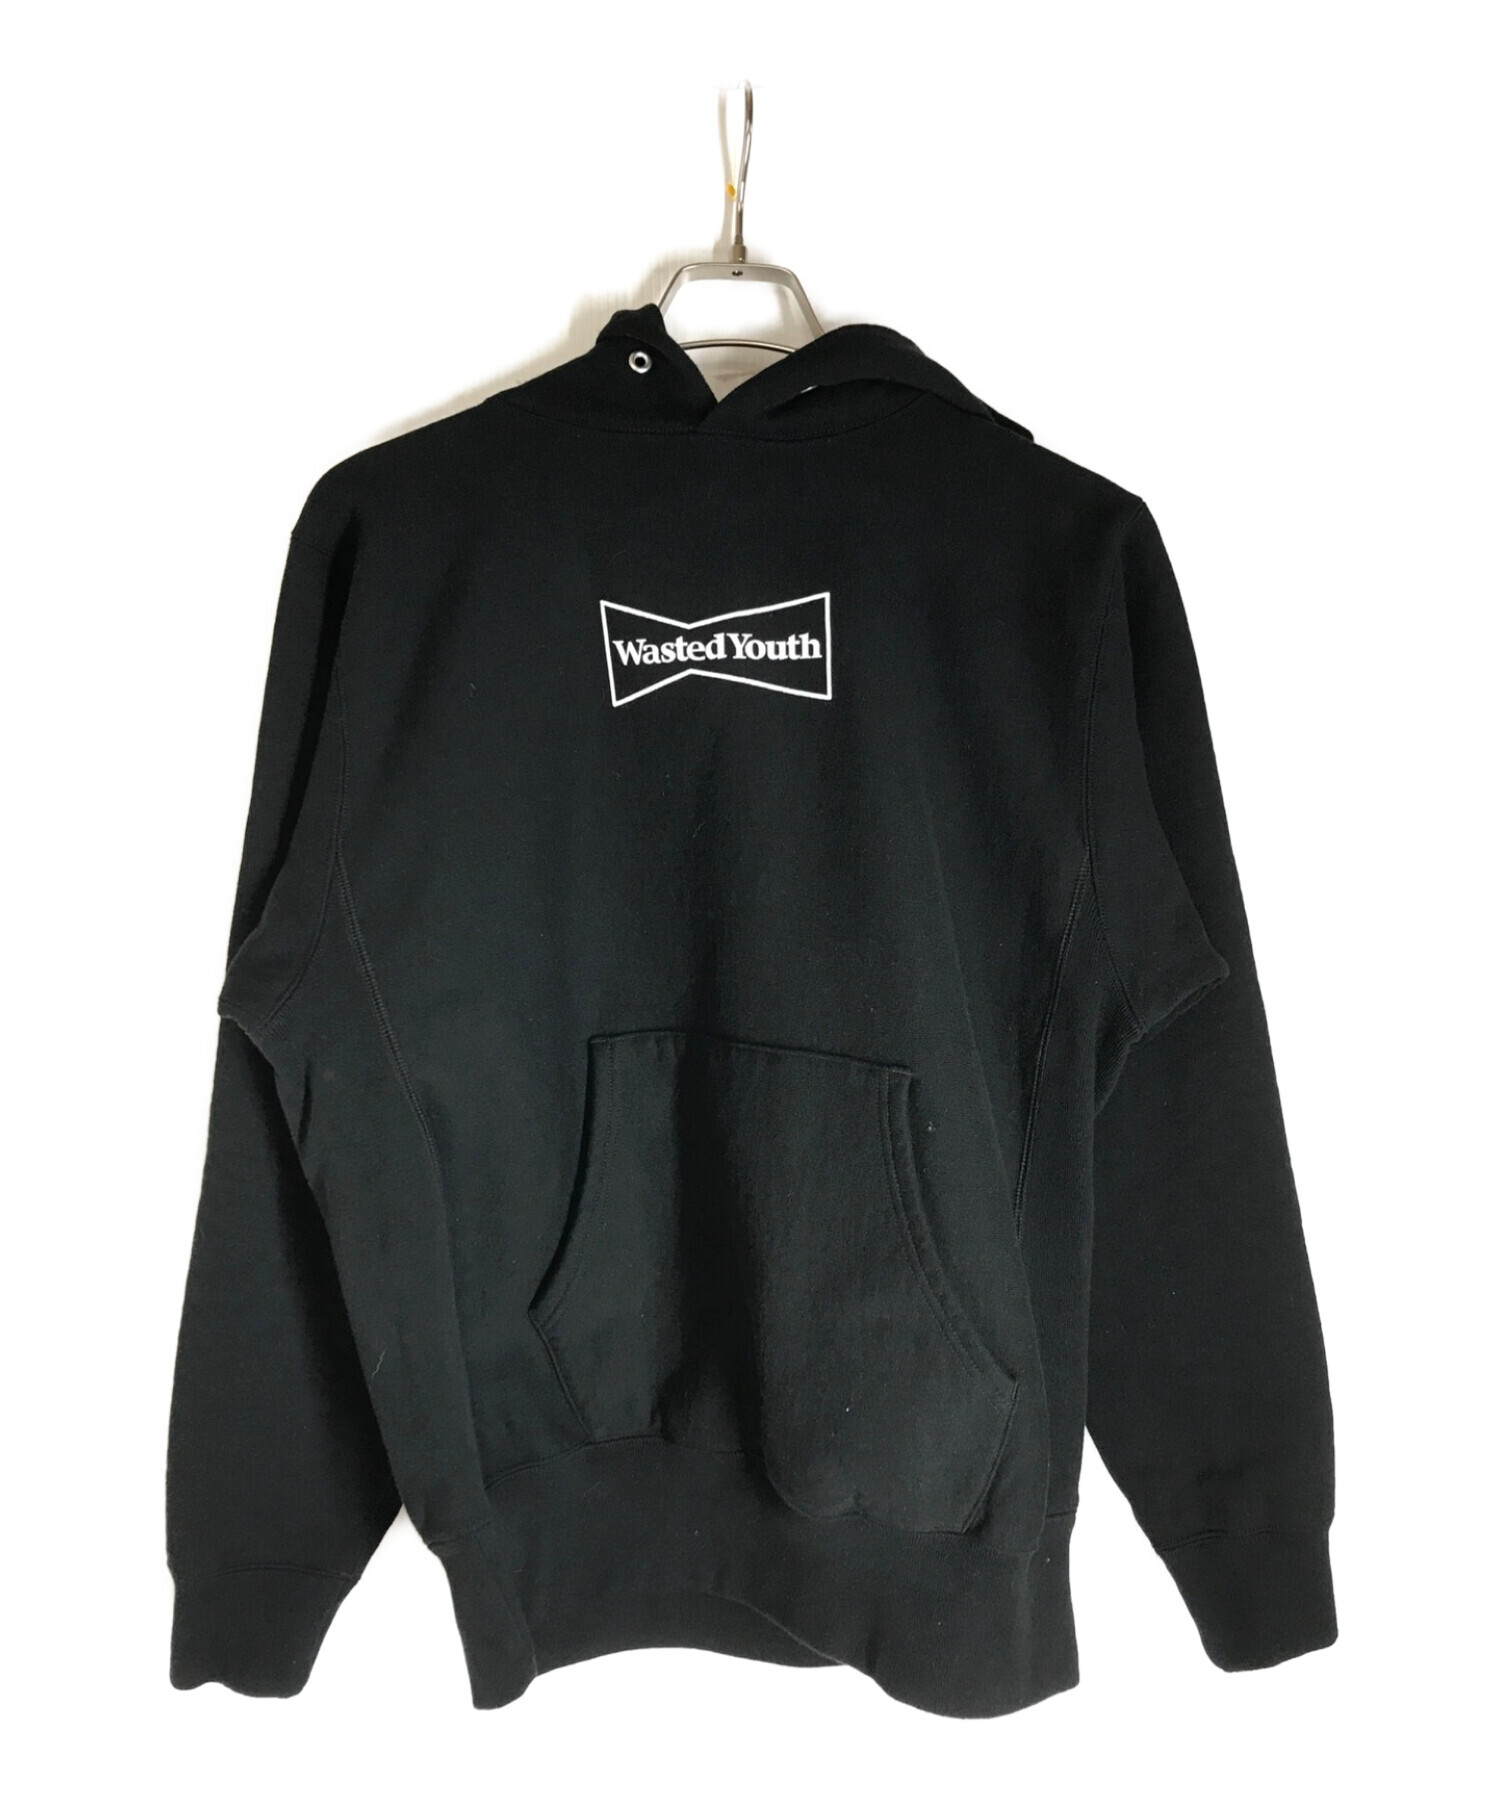 Wasted Youth Hoodie OTSUMO PLAZA 限定“ブラックwastedyouth